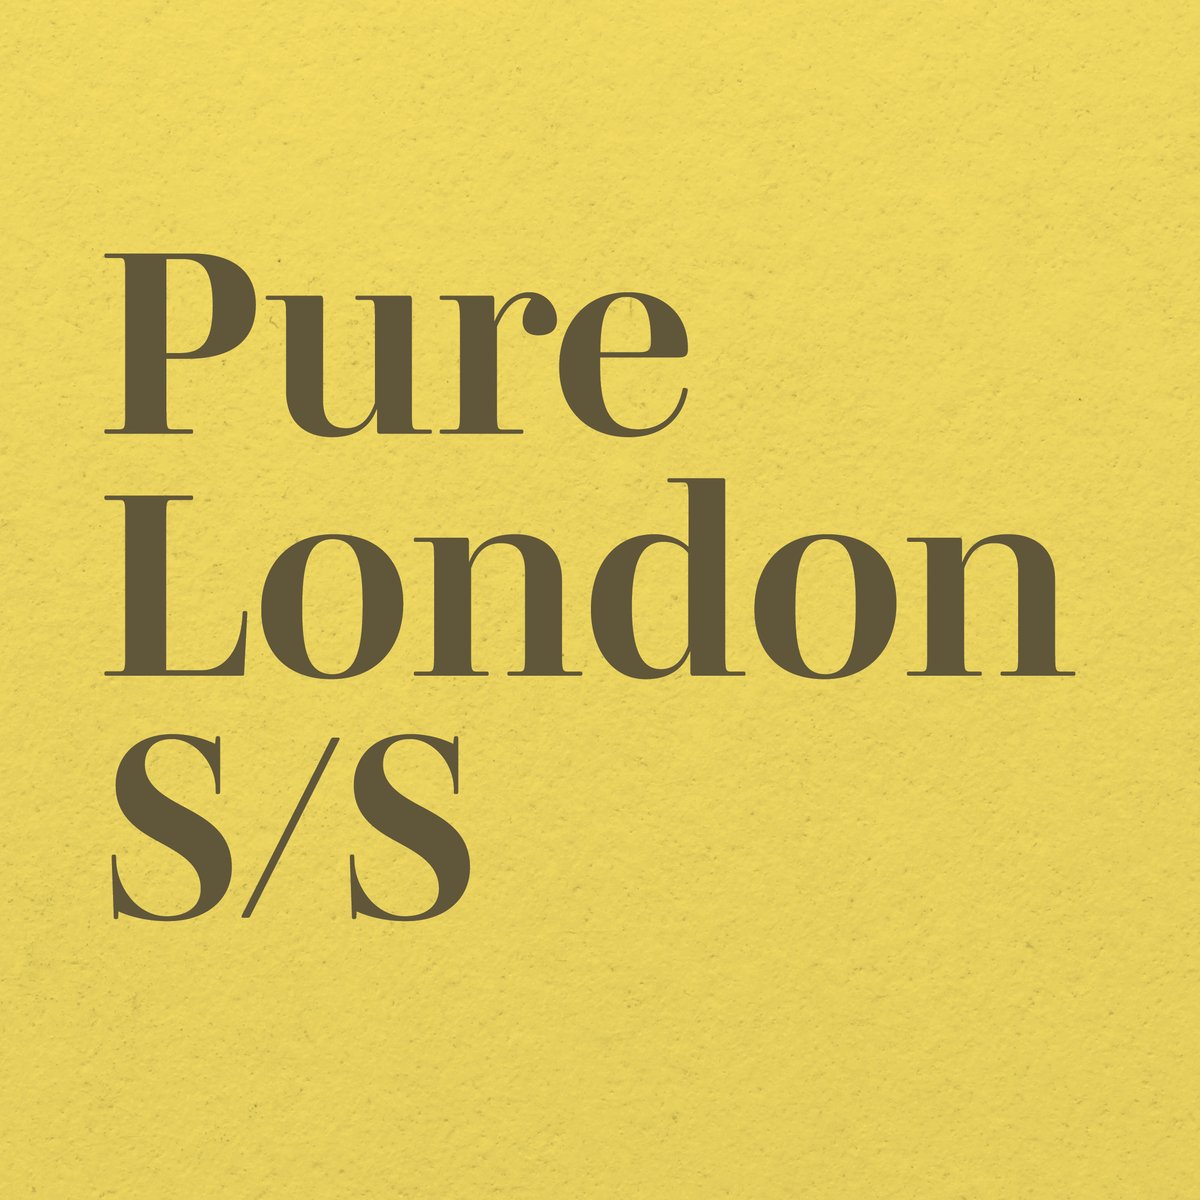 Get exclusive access to the latest fashion trends and collections, all under one iconic roof,
Pure London is back, 16-18 July, Olympia London.

#purelondon #purelondonshow #fashionbuying #fashiontradeevent